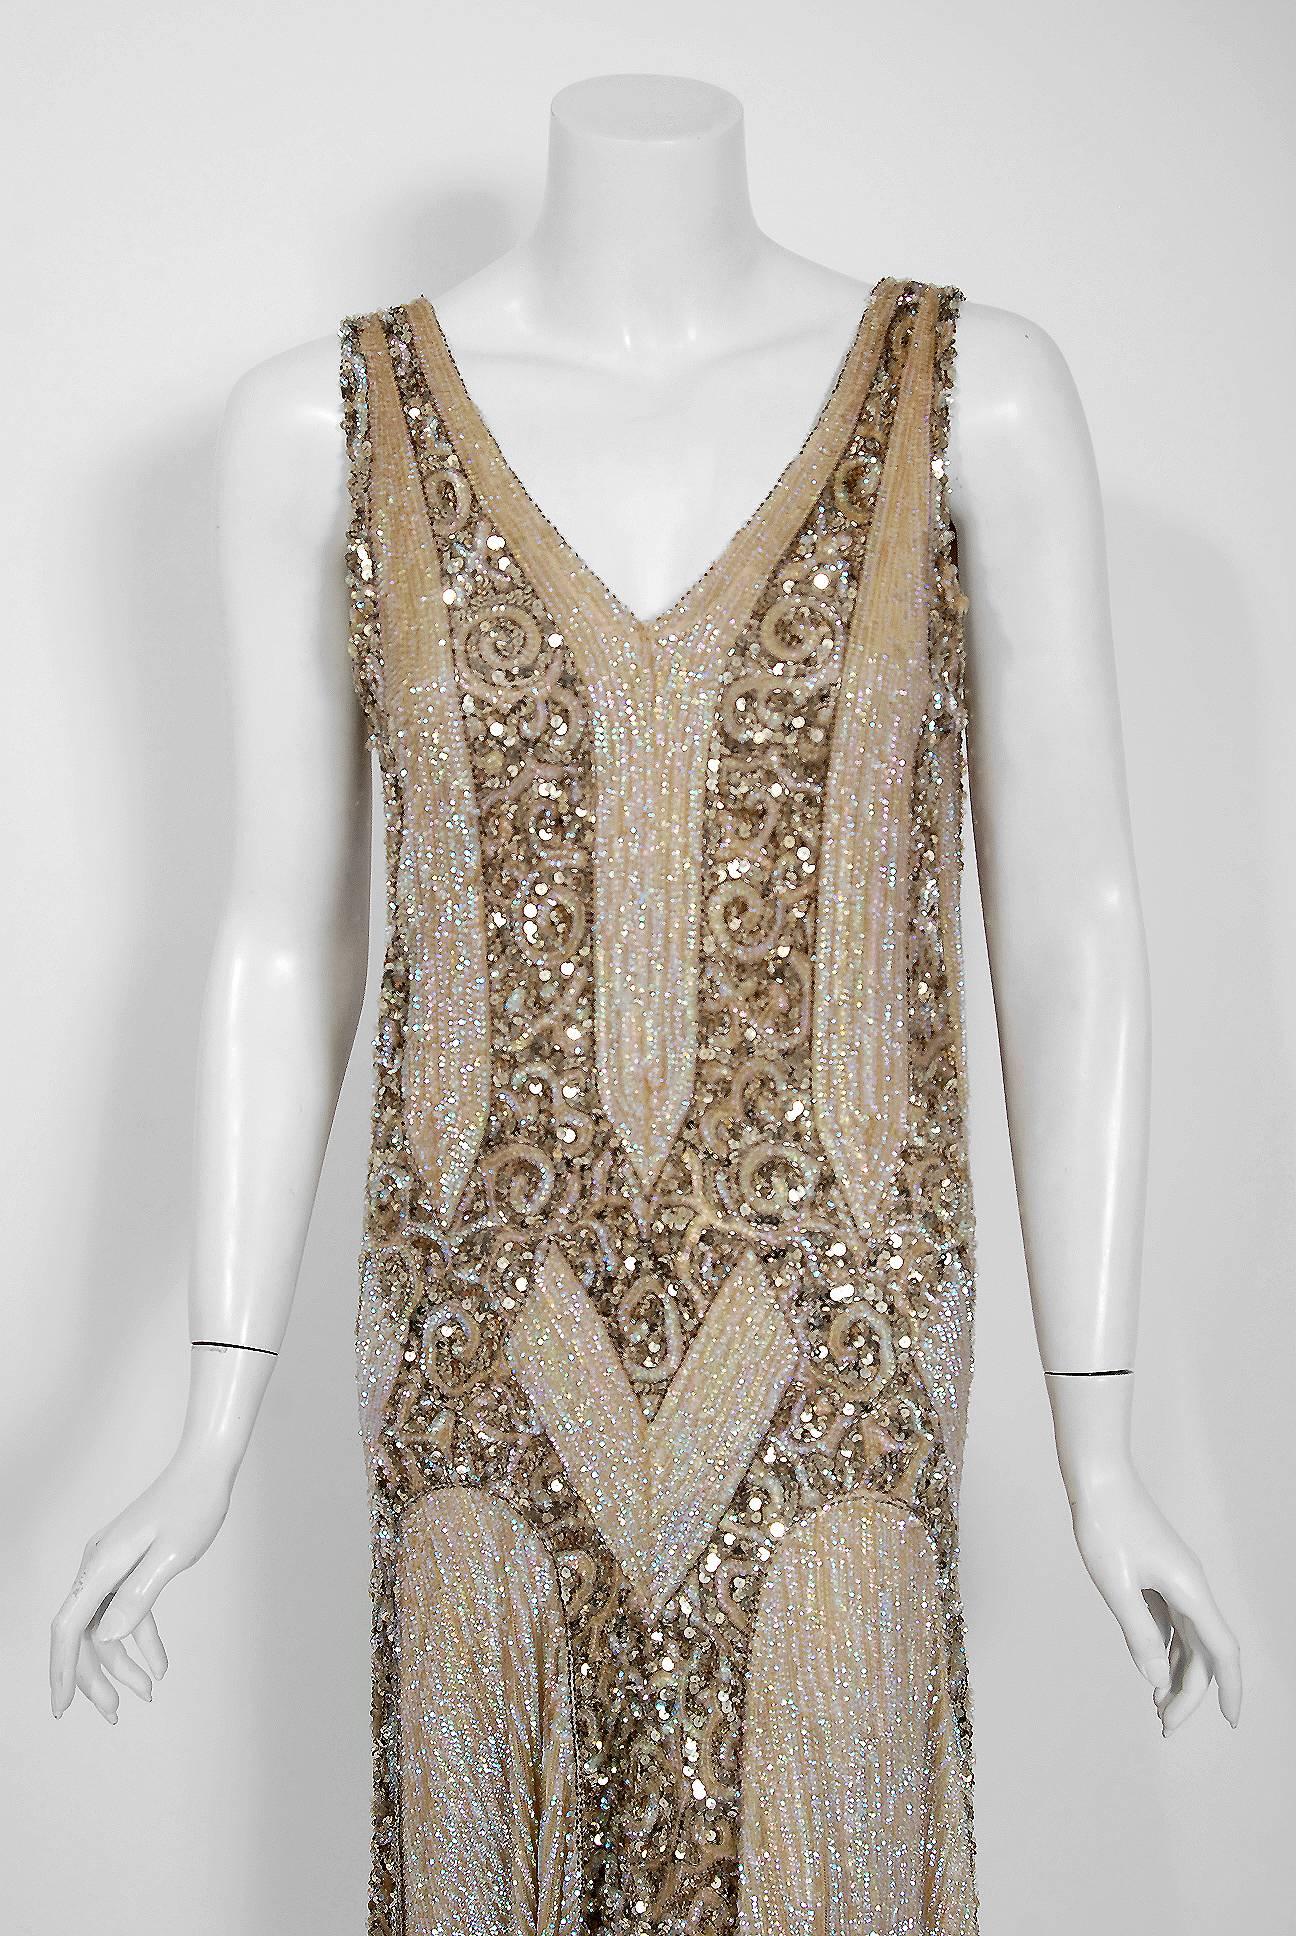 Breathtaking 1920's French museum quality sparkling net-tulle flapper dance dress. The champagne golden color palette touches a deep chord in our collective aesthetic consciousness. As fashion lovers, we never tire from antique beadwork; it will